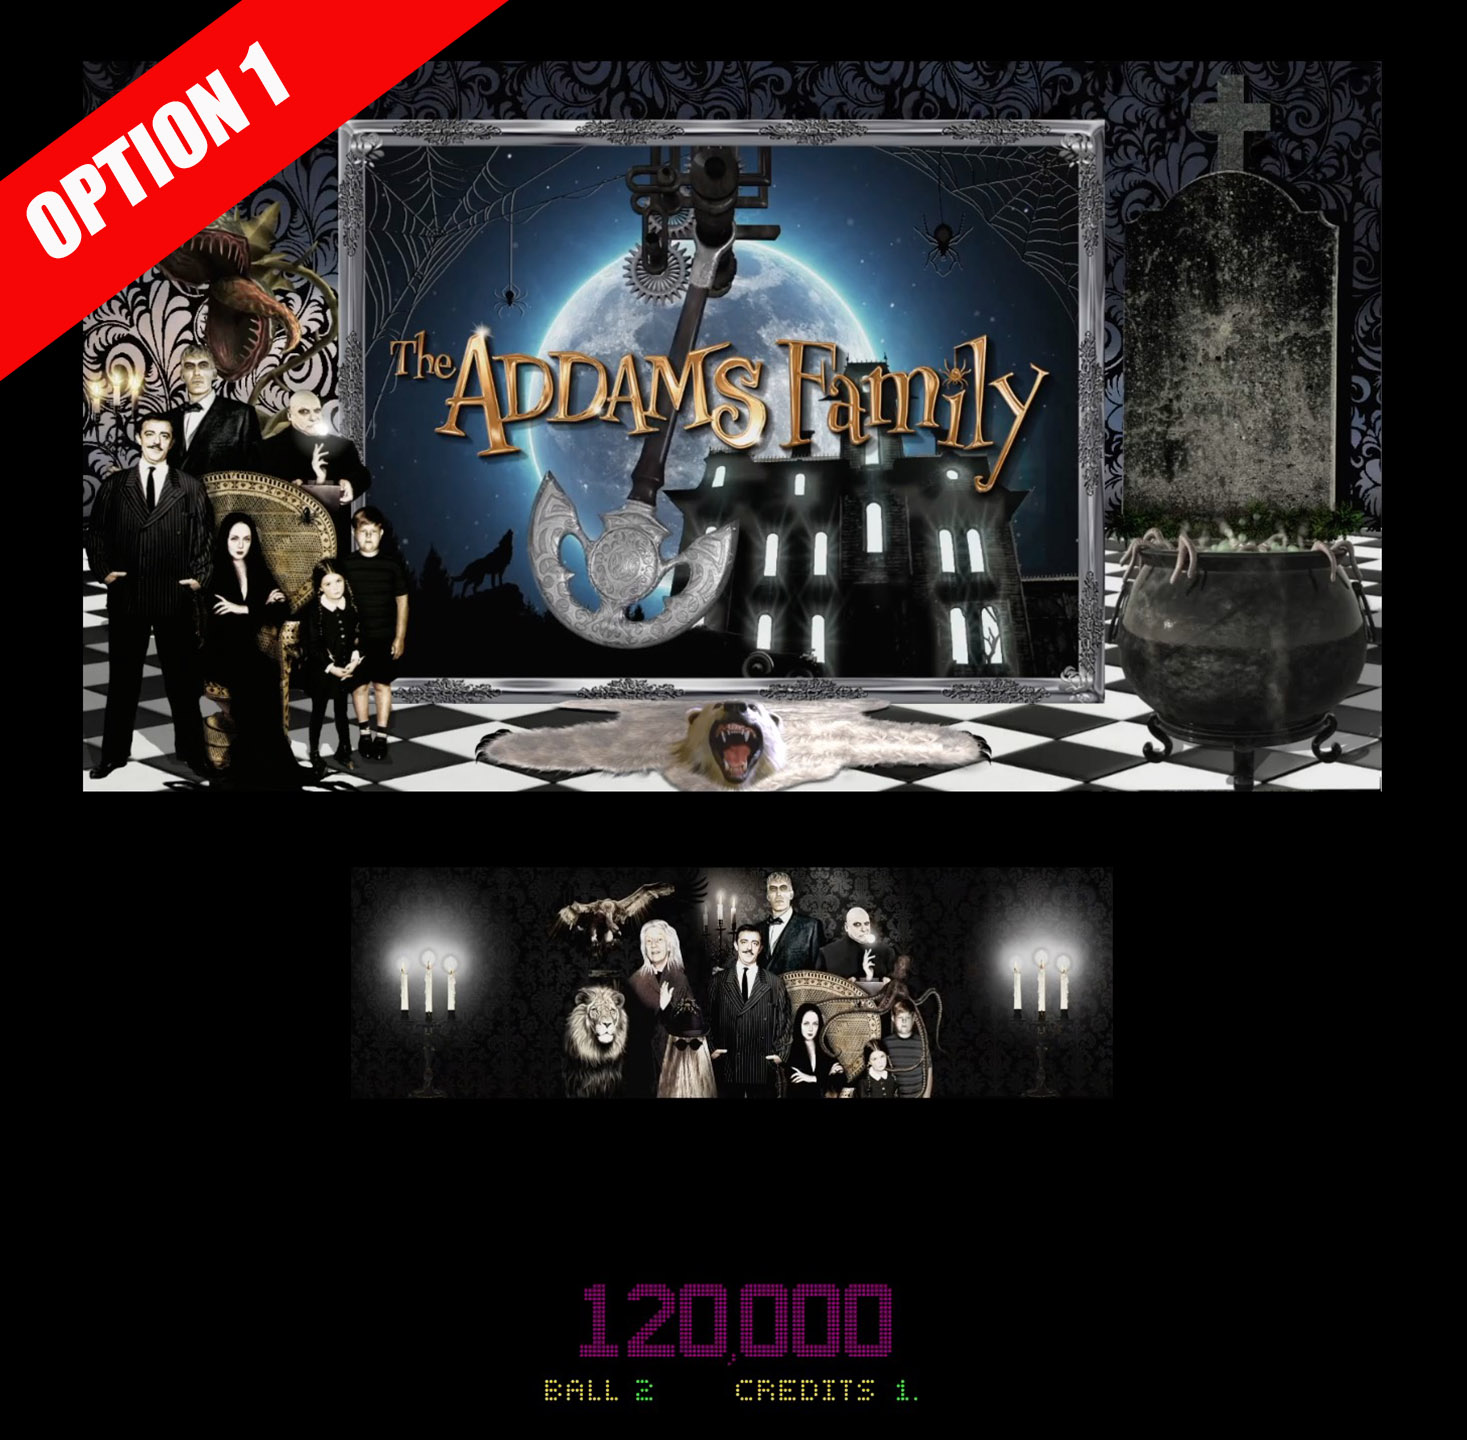 The Addams Family "TV Show" Pup-Pack